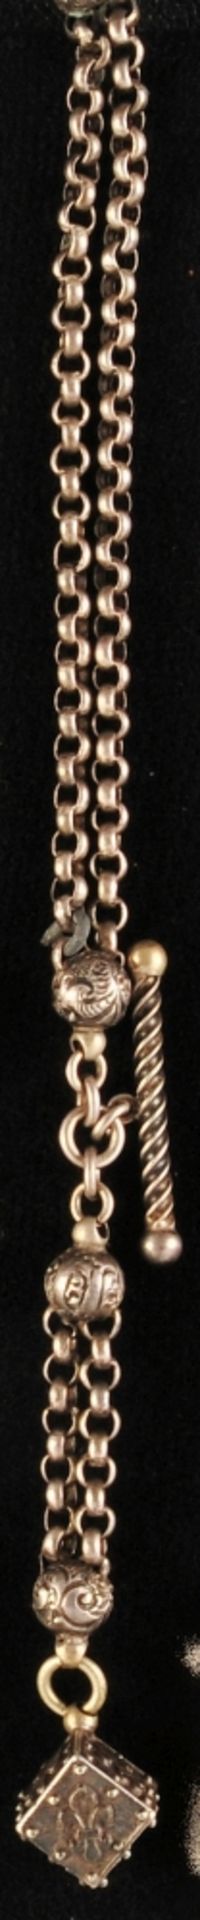 Silver pocket watch chain, 2-row, with decorated pendant in the shape of a cube